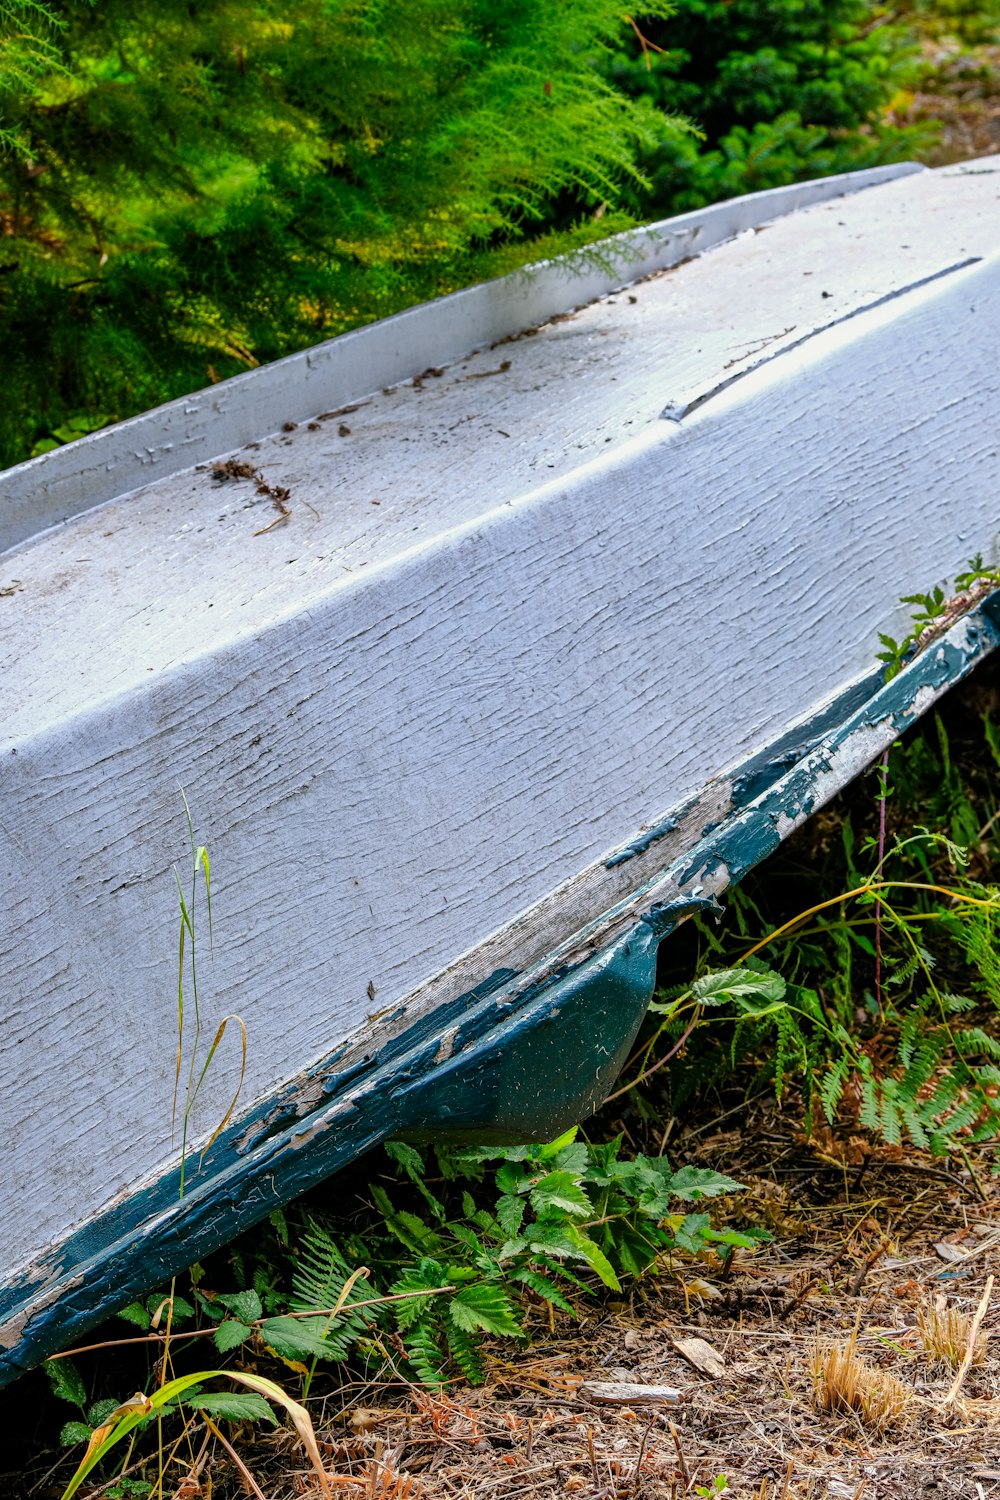 a boat sitting on the ground next to a forest